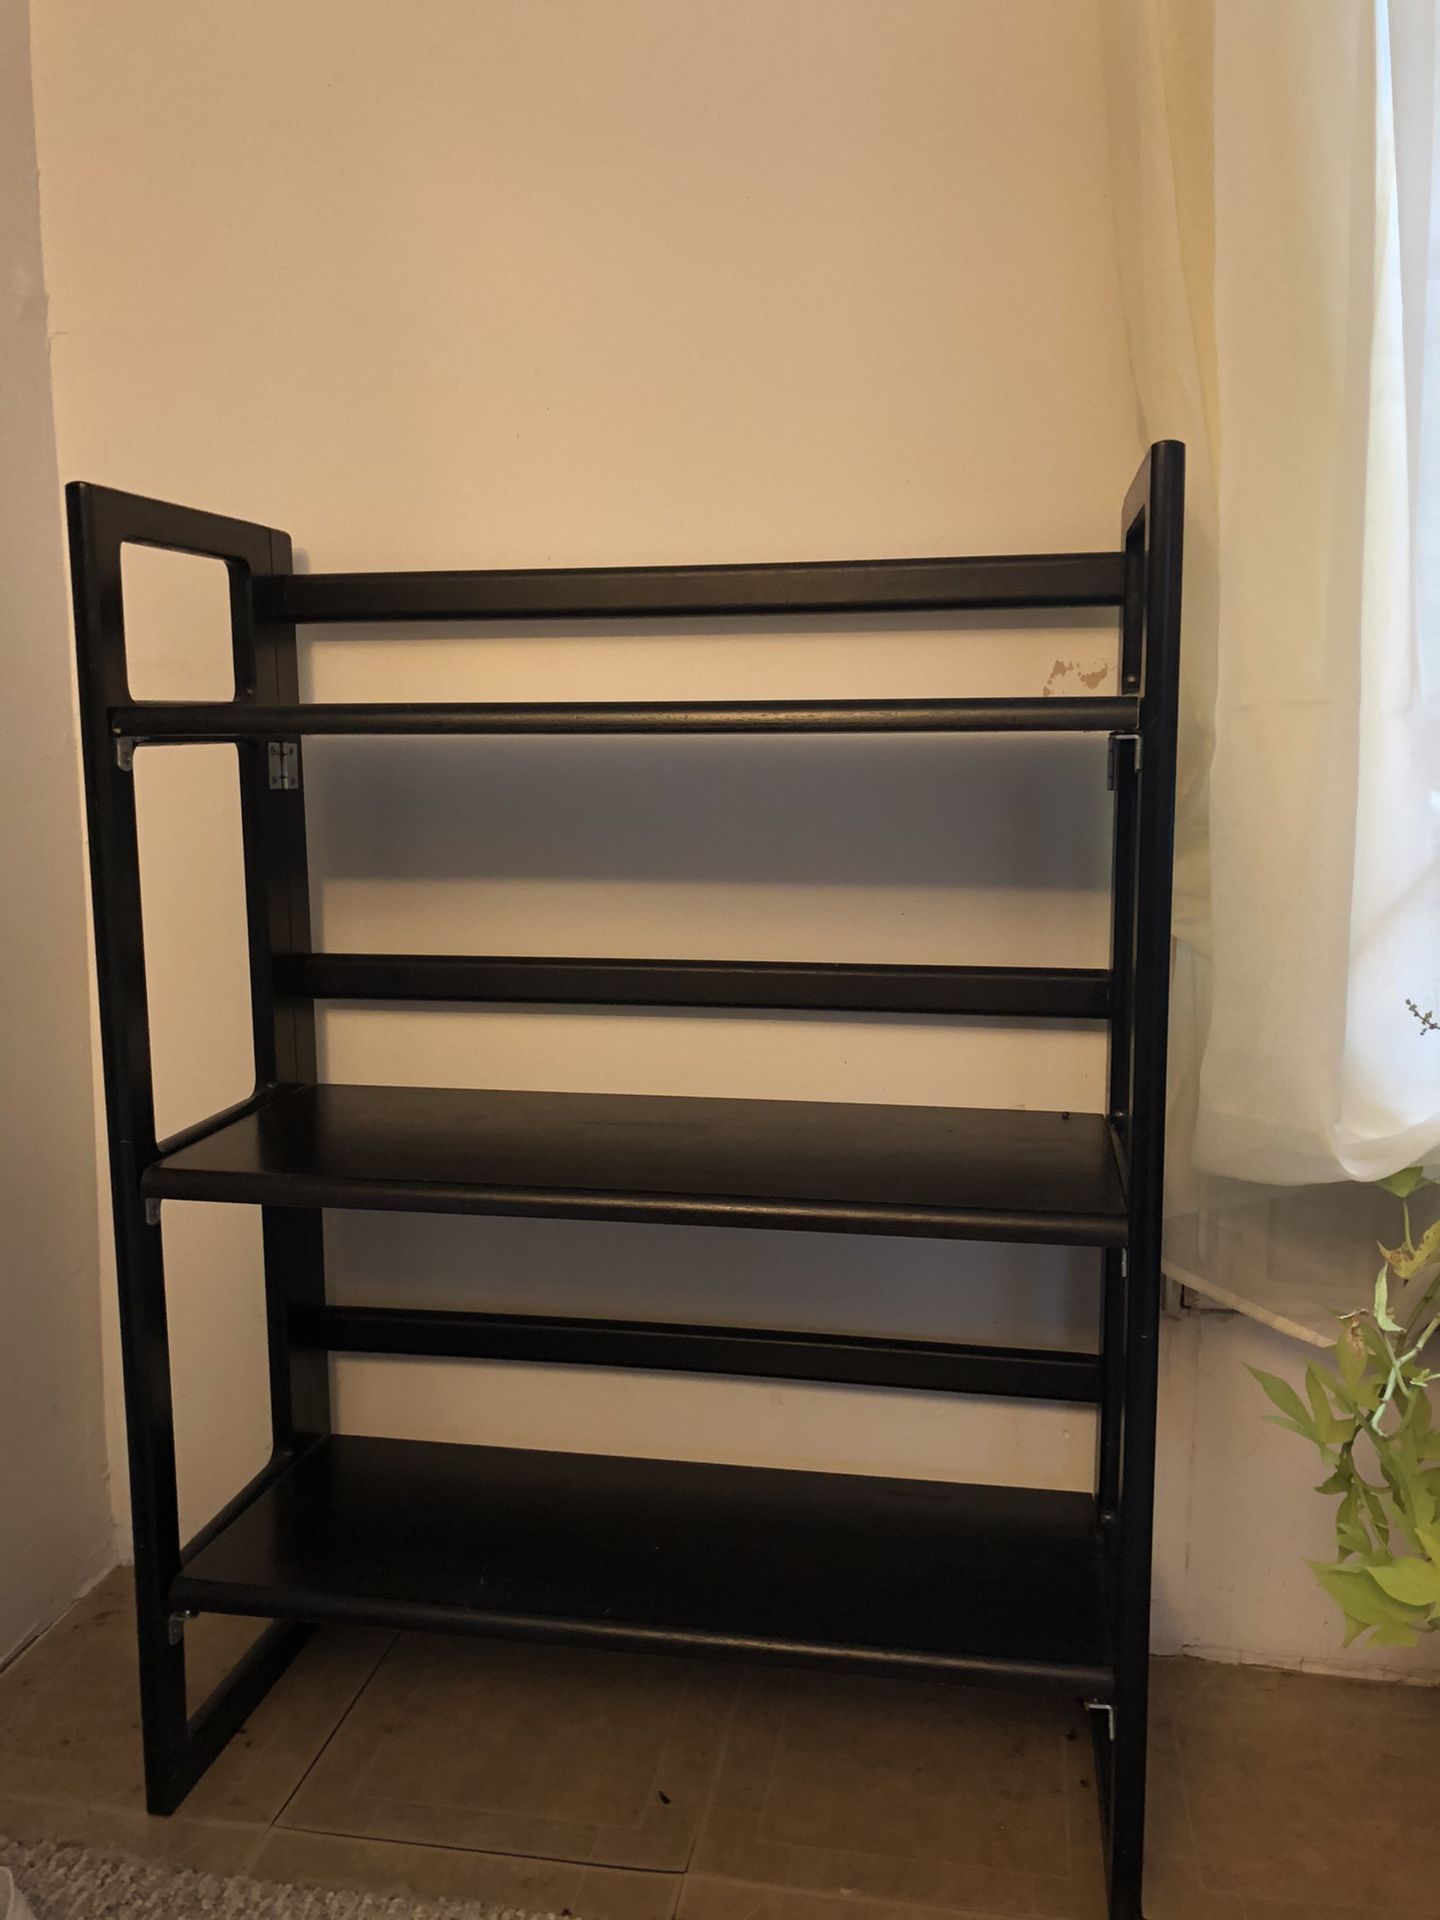 Collapsible dark wood shelving unit